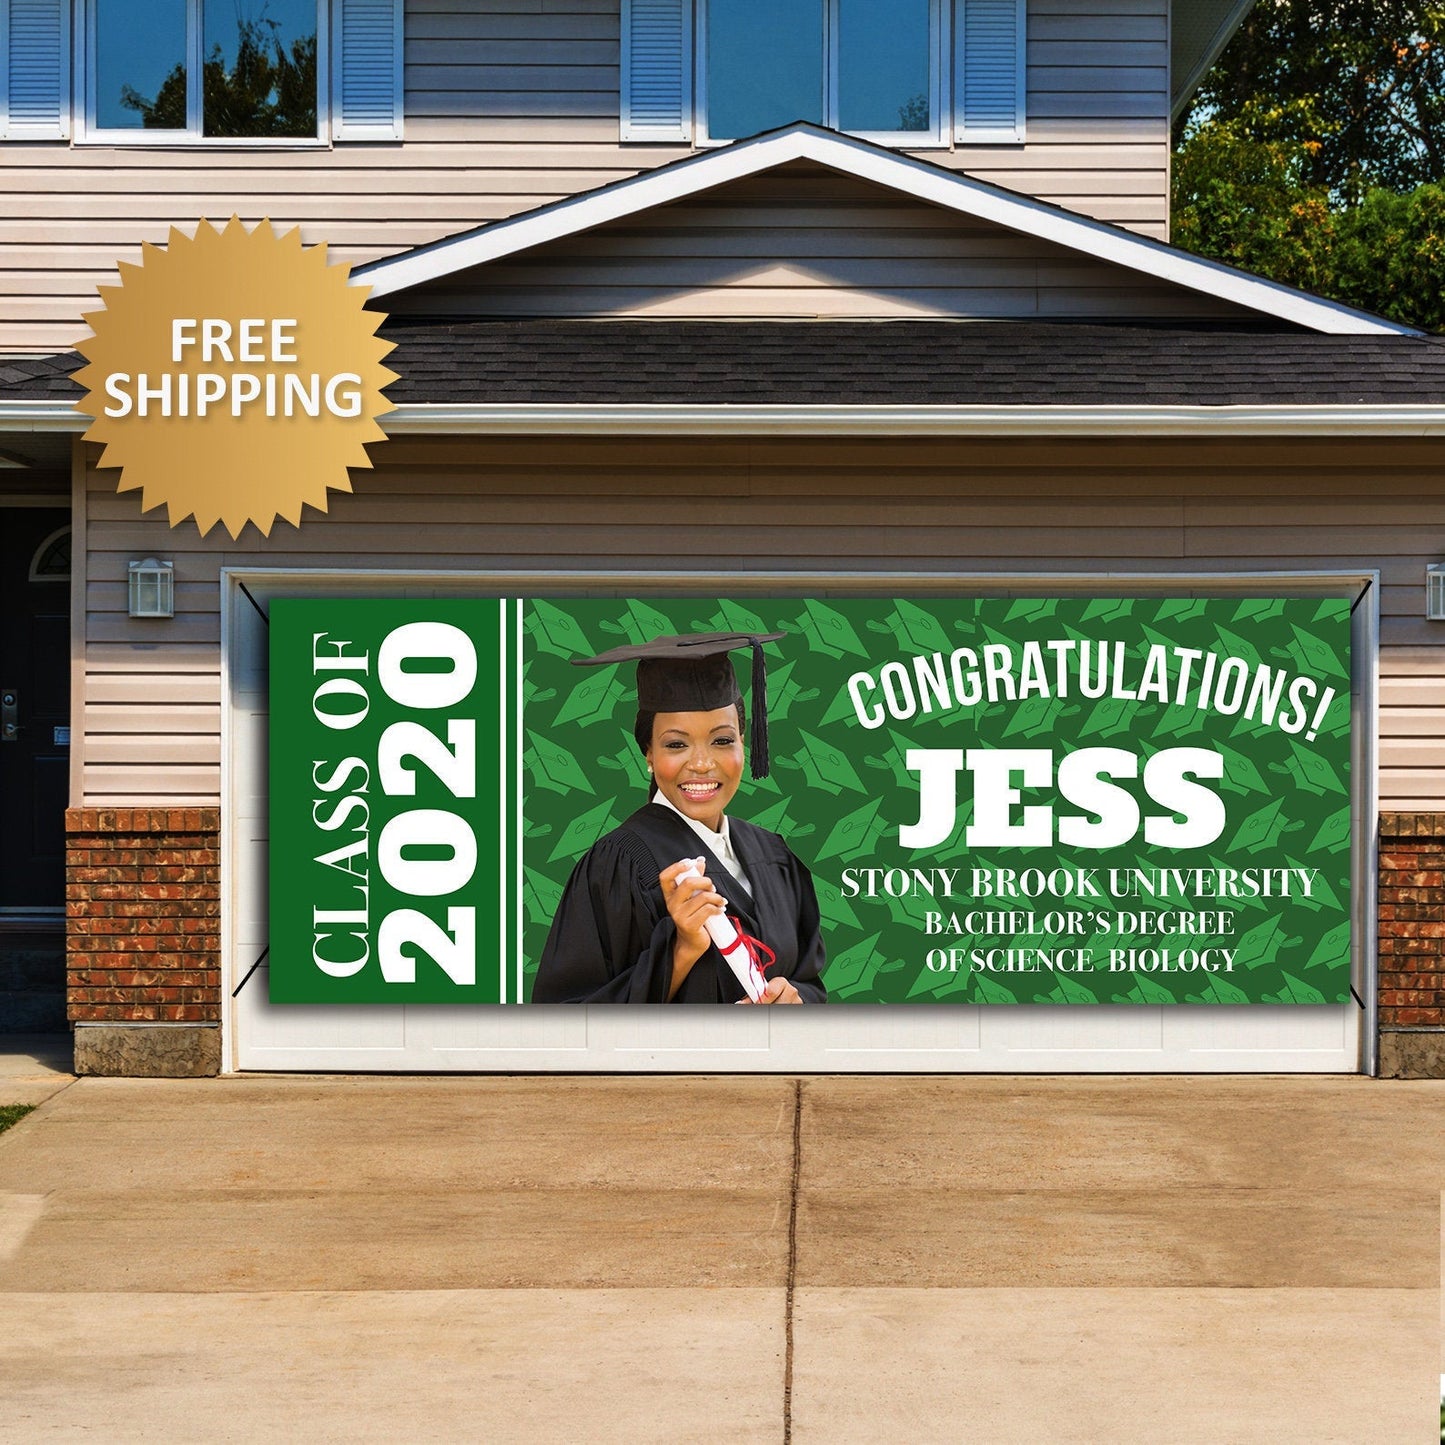 Class of 2020 Photo Banner, Graduation Custom Photo Banner, Rose Gold Grad Photo Banner, Congrats Grad Party Banners, Drive by